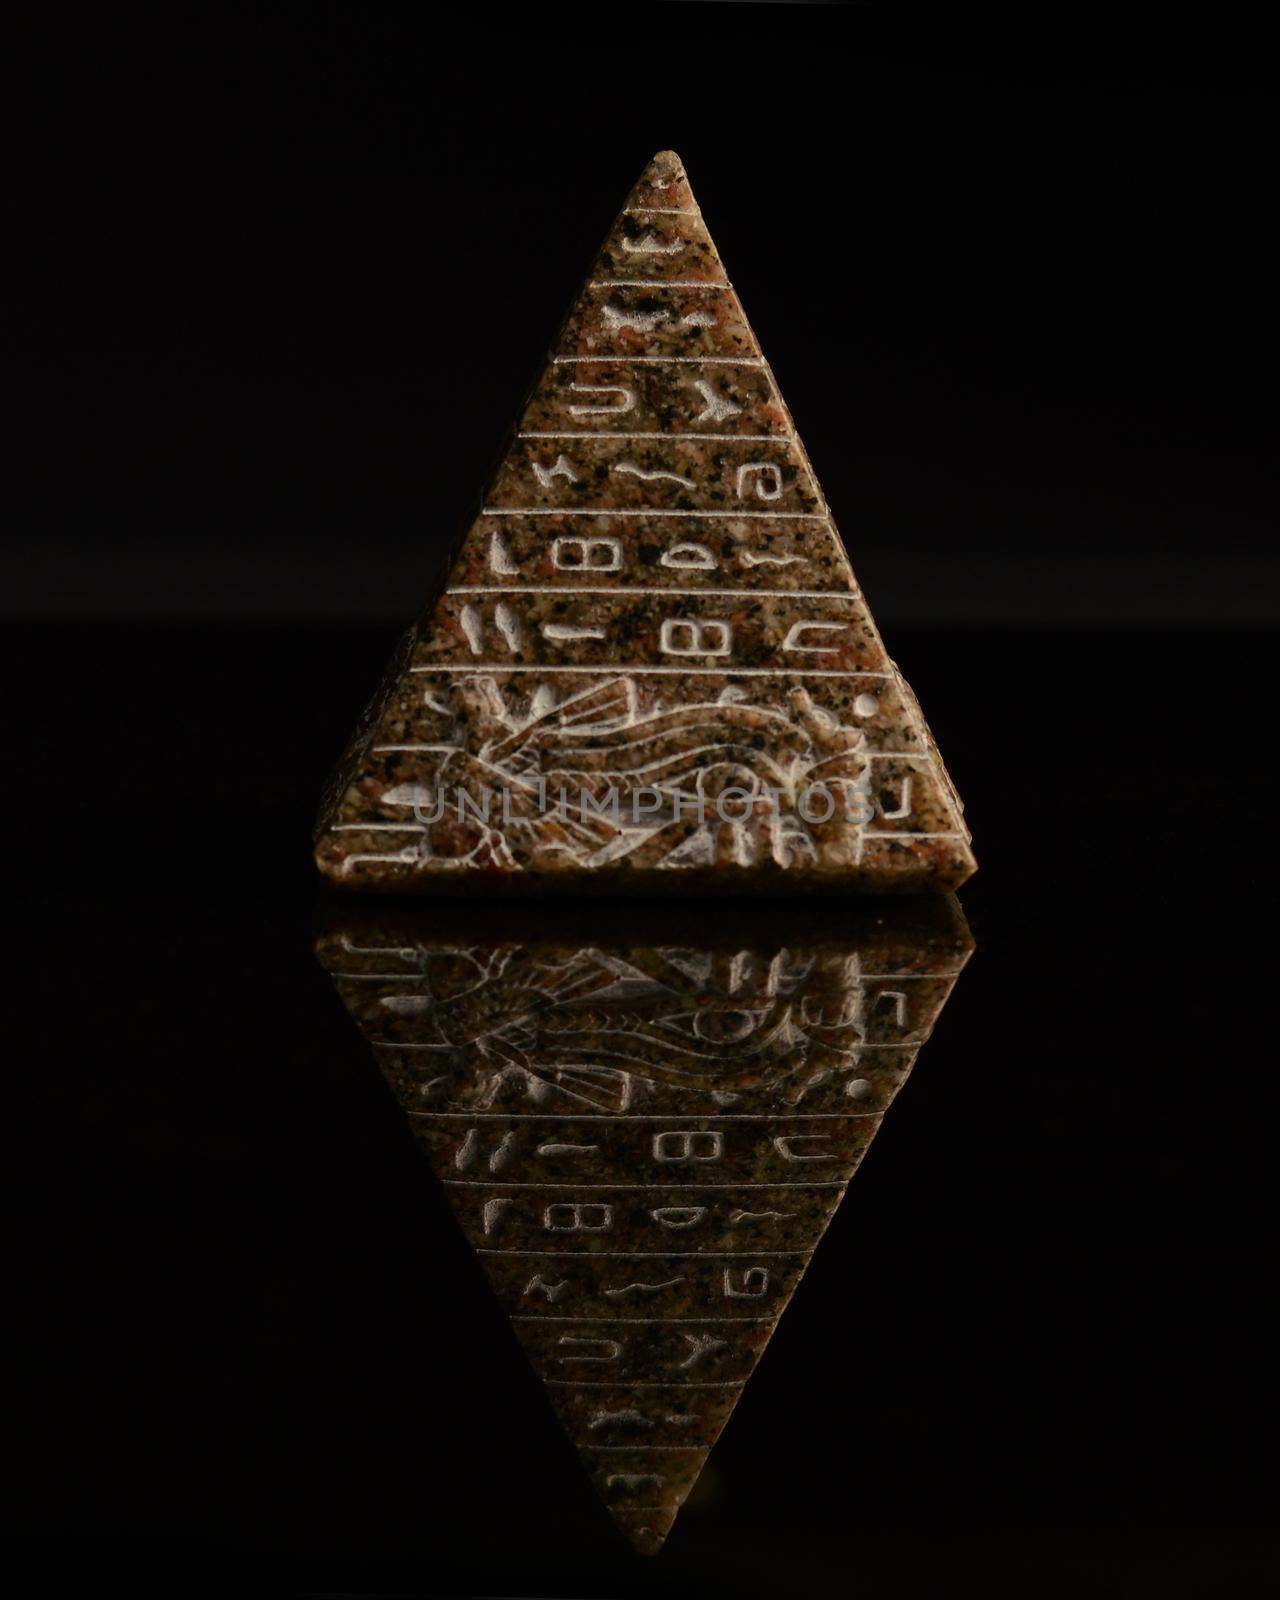 A handcrafted keepsake sold to tourist who travel to Egypt representing the iconic hieroglyphics of the pyramids.